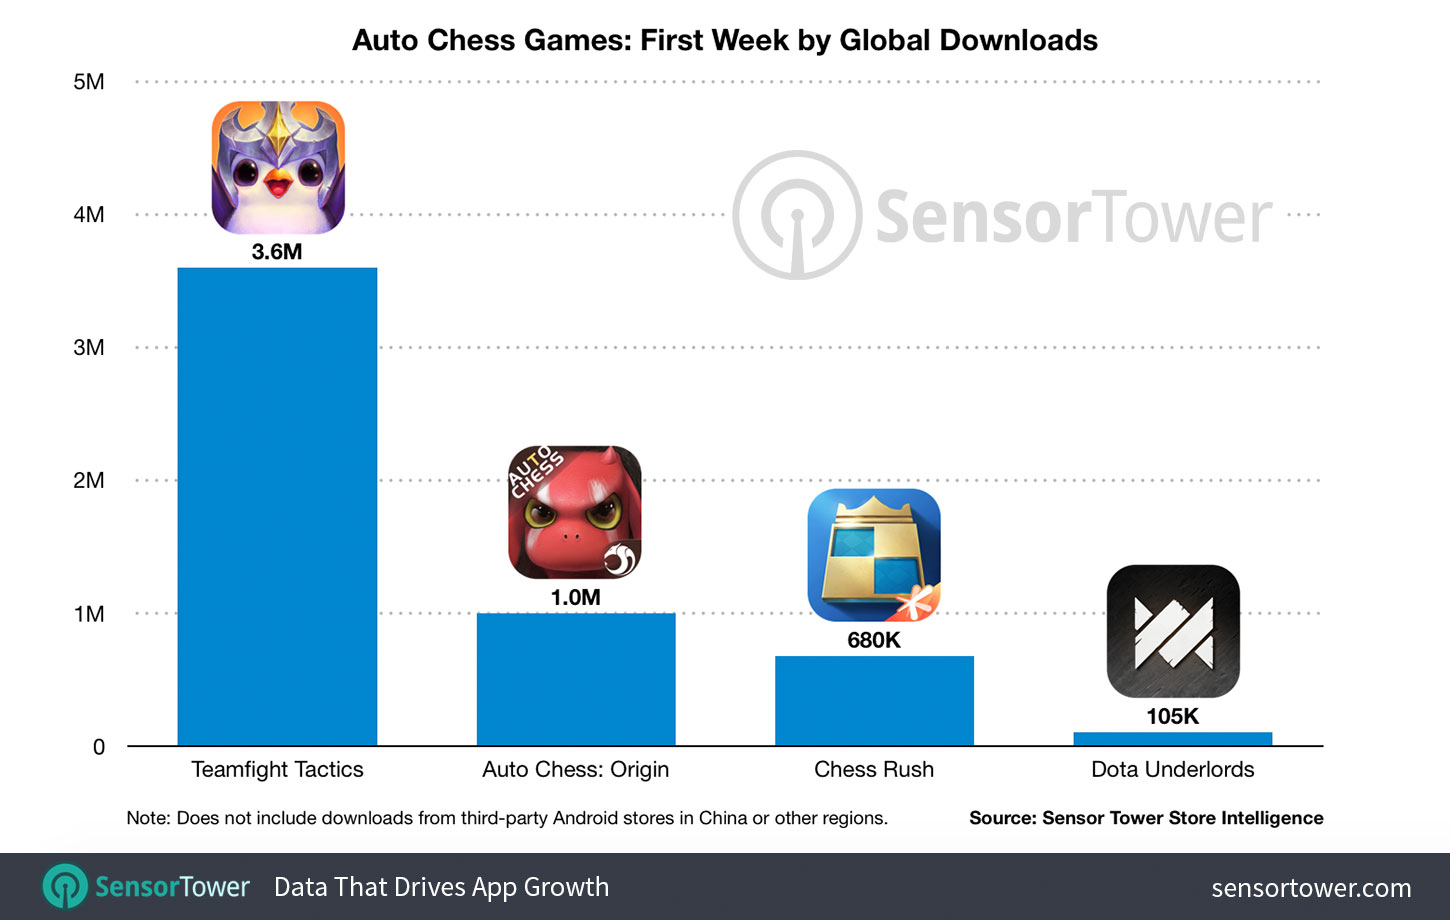 Auto Chess Games: First Week by Global Downloads